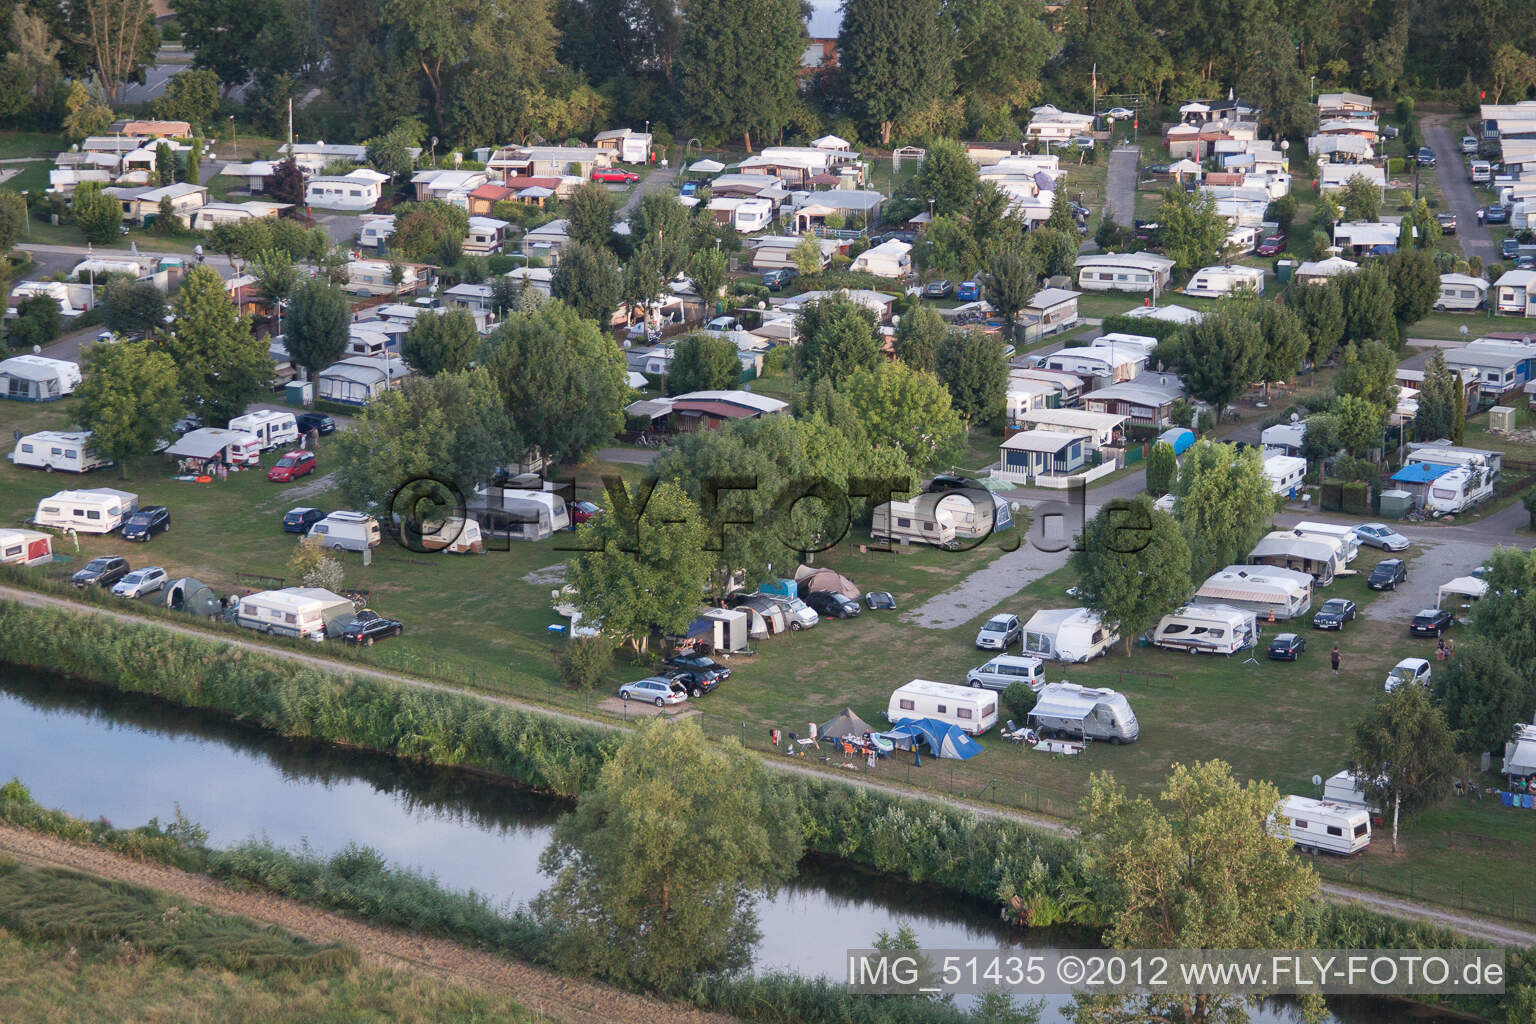 Oblique view of Campsite in Rülzheim in the state Rhineland-Palatinate, Germany